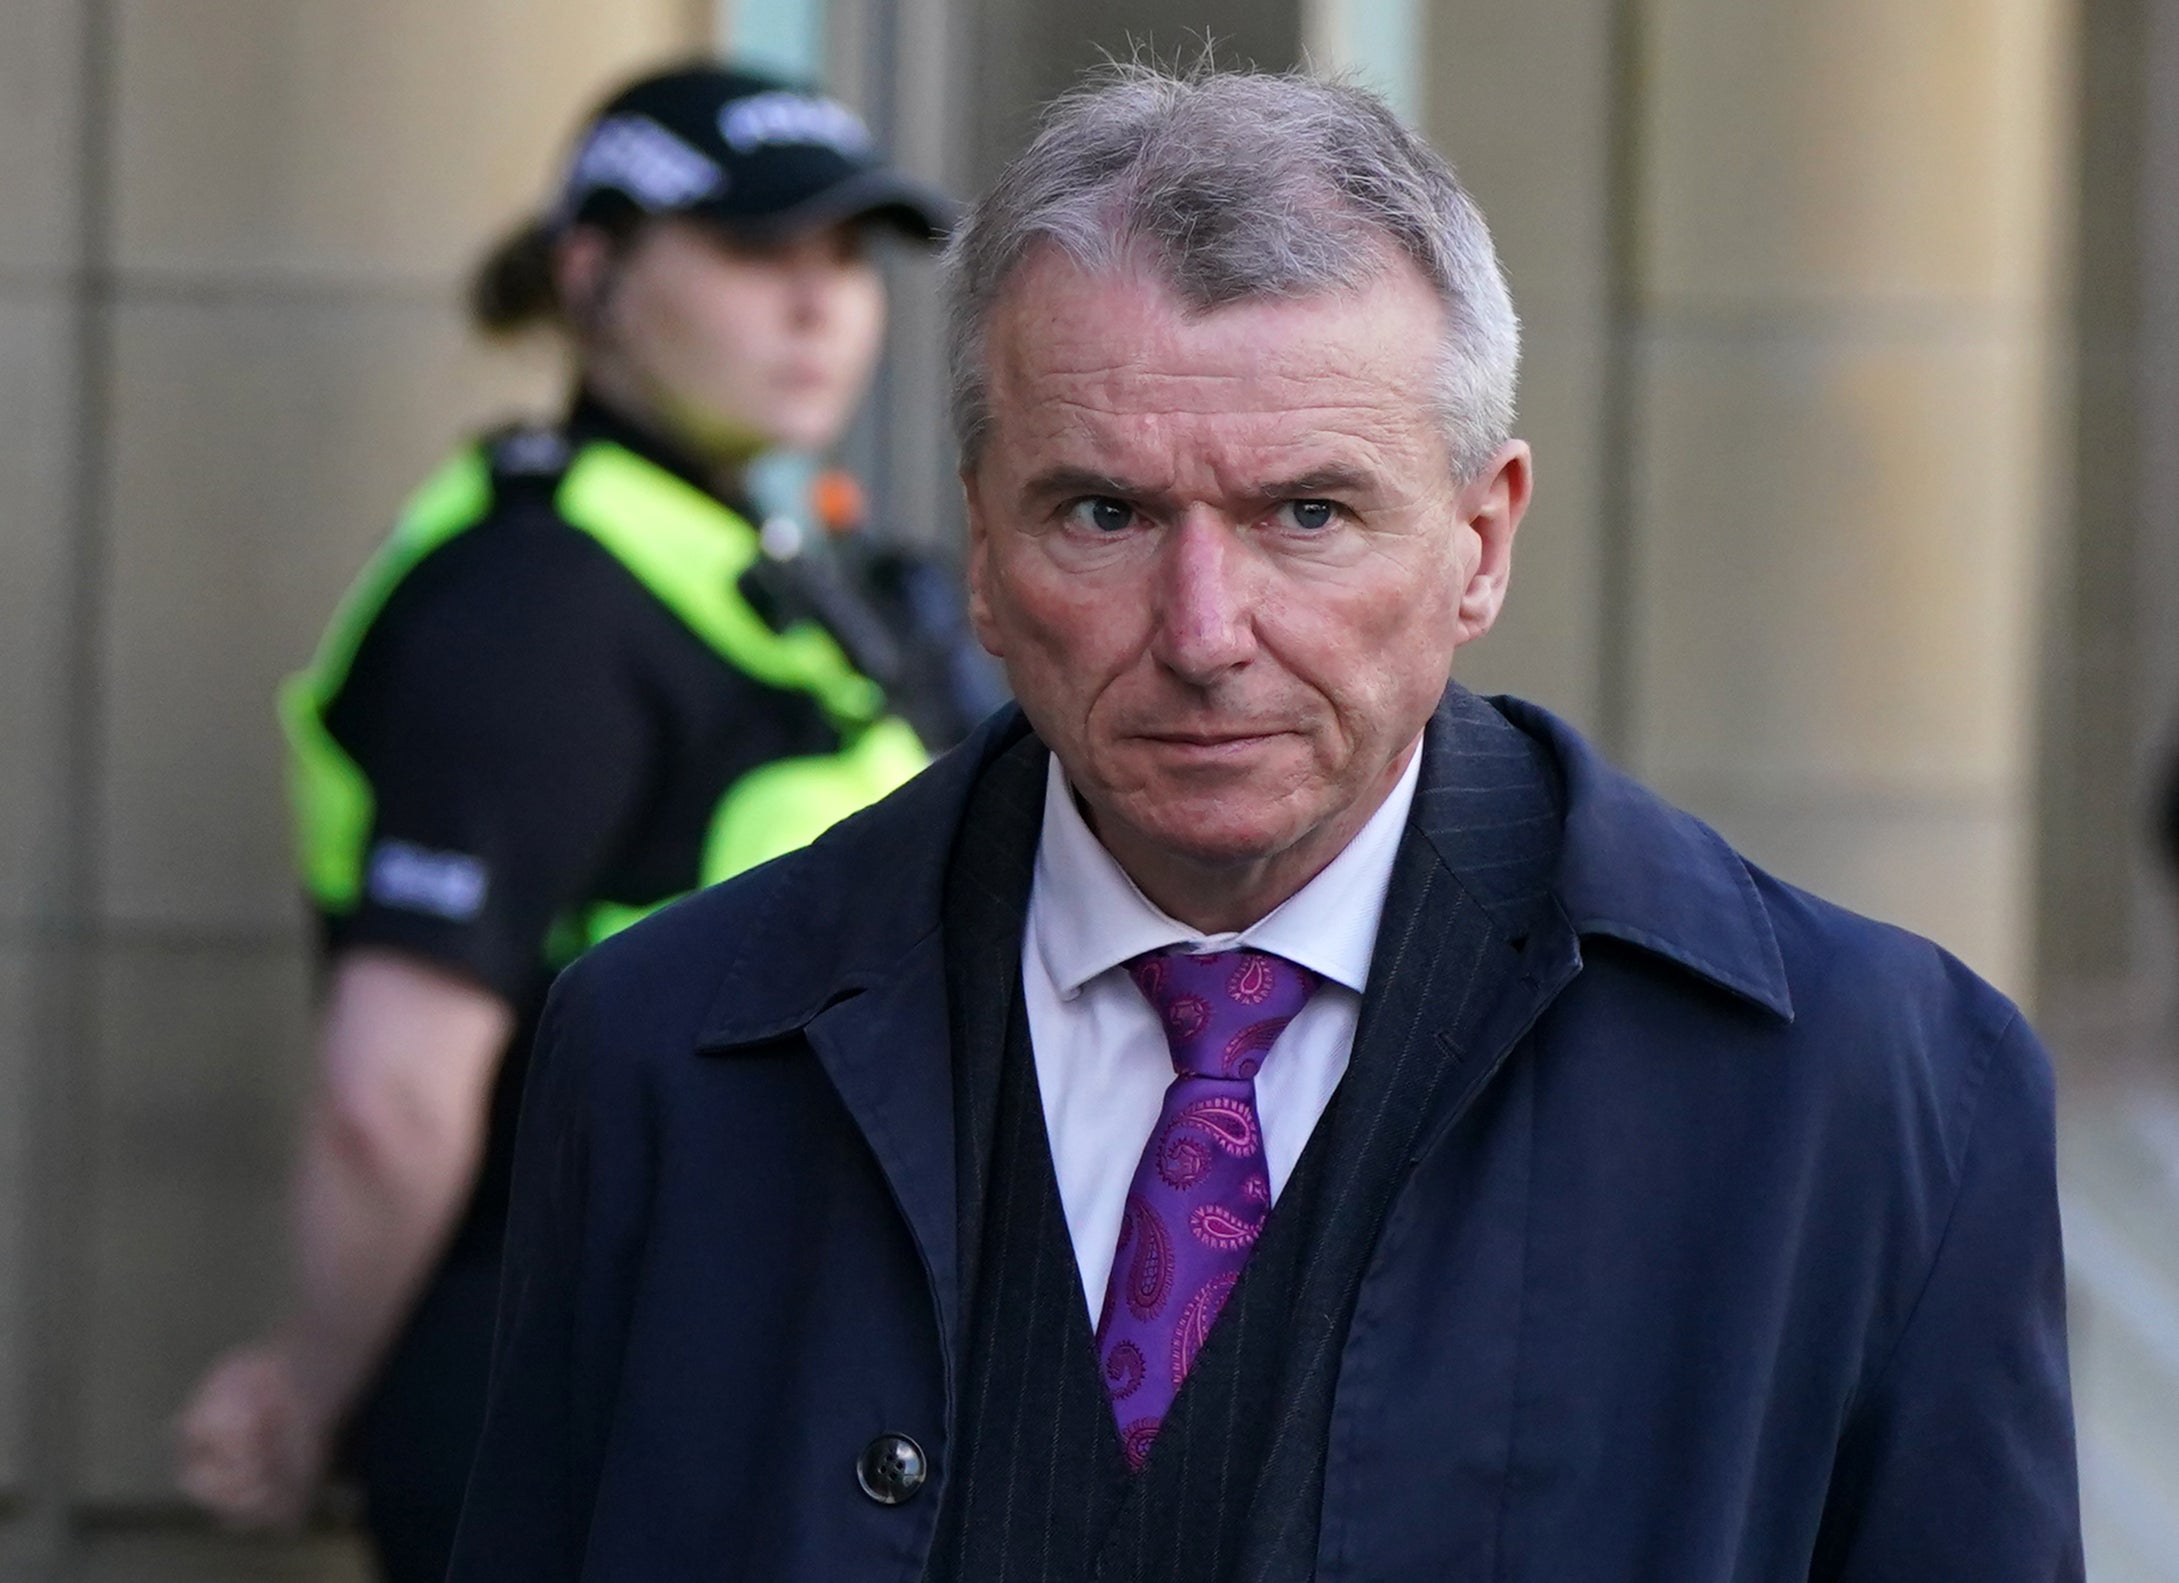 Brian McConnachie QC is representing retired policeman Alan Paton, who was one of the officers involved in restraining Sheku Bayoh the day he died (Andrew Milligan/PA)